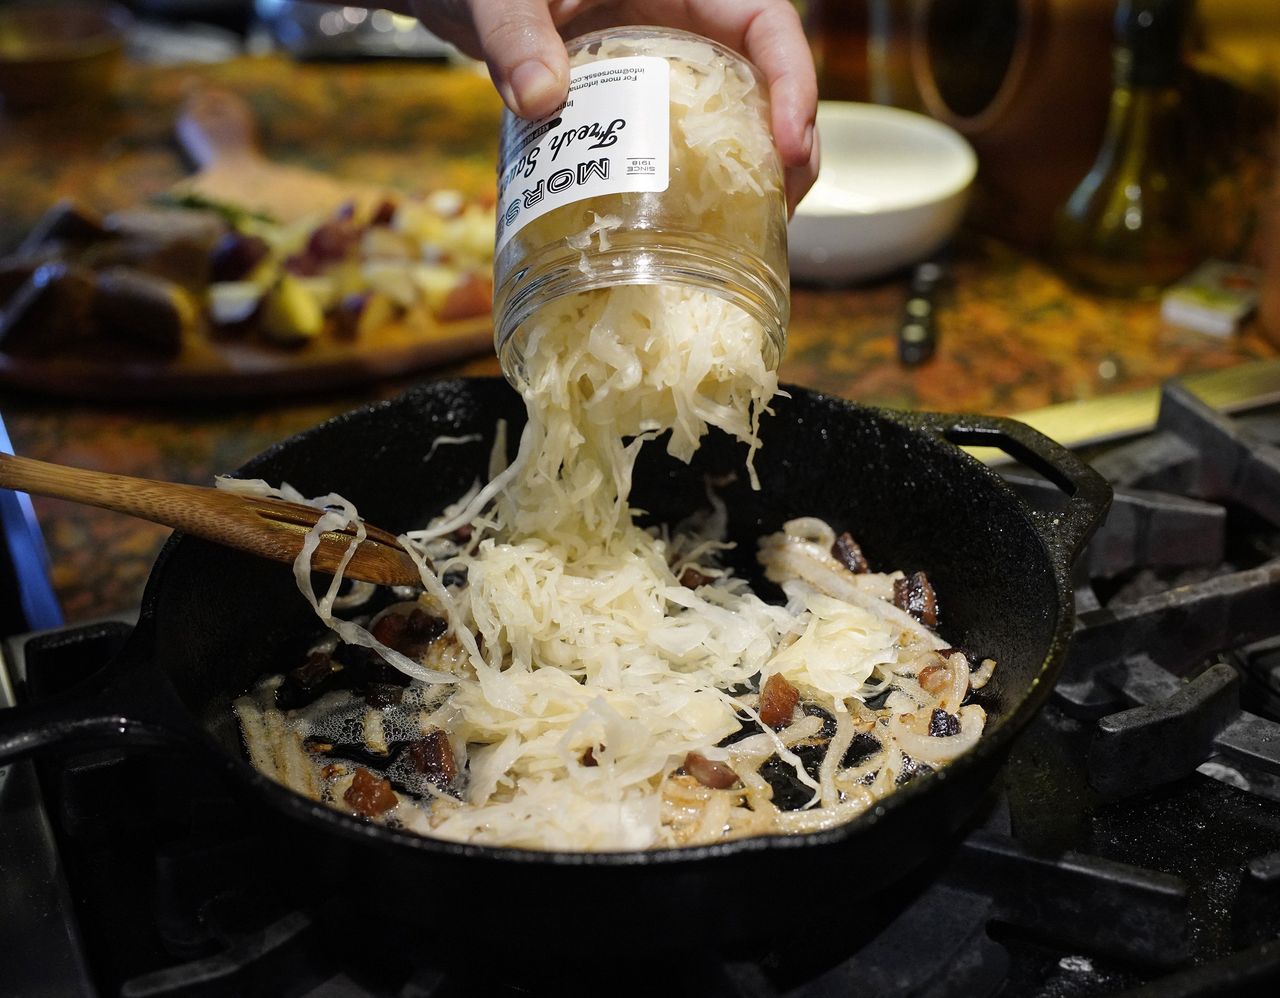 The sauerkraut from this recipe always turns out crunchy.